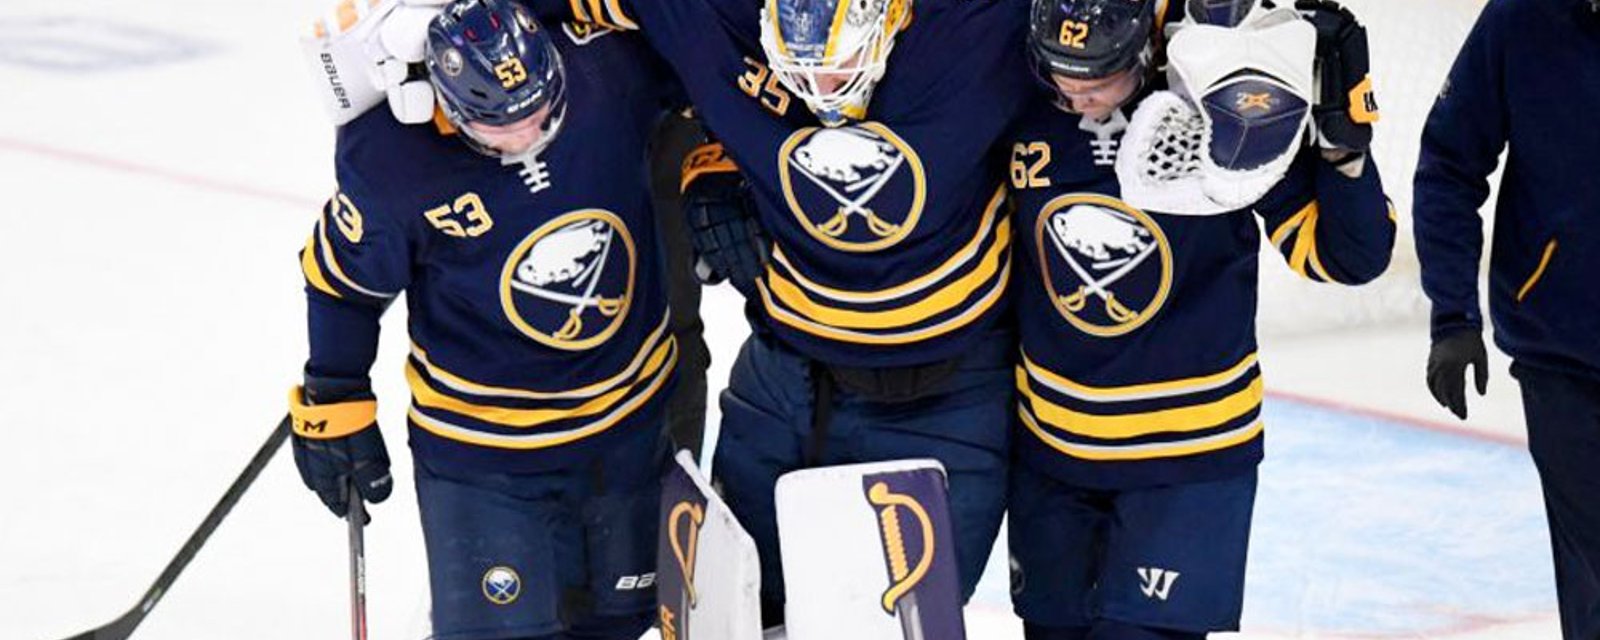 Sabres and Pegula family come under fire for censoring angry fans